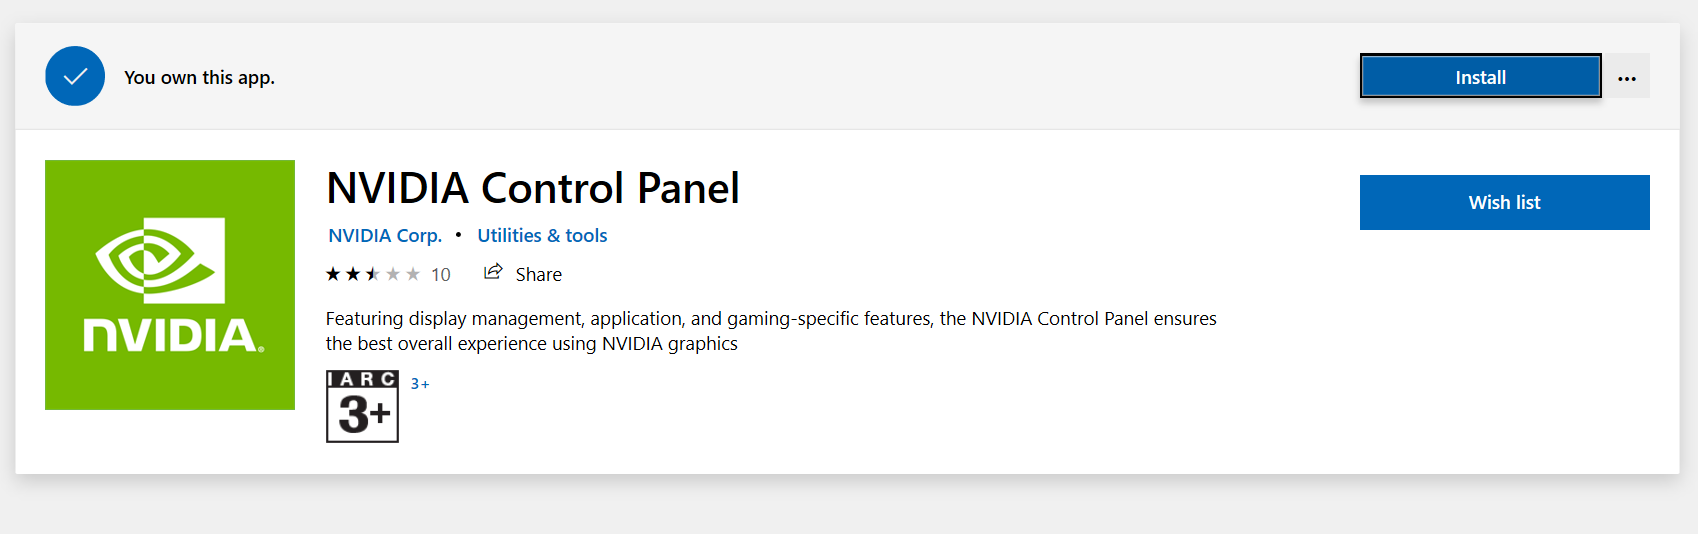 Microsoft Store issue (cannot download Intel HD and Nvidia control panel) 4c72ee03-18ba-41ab-9078-1b99bf246425?upload=true.png